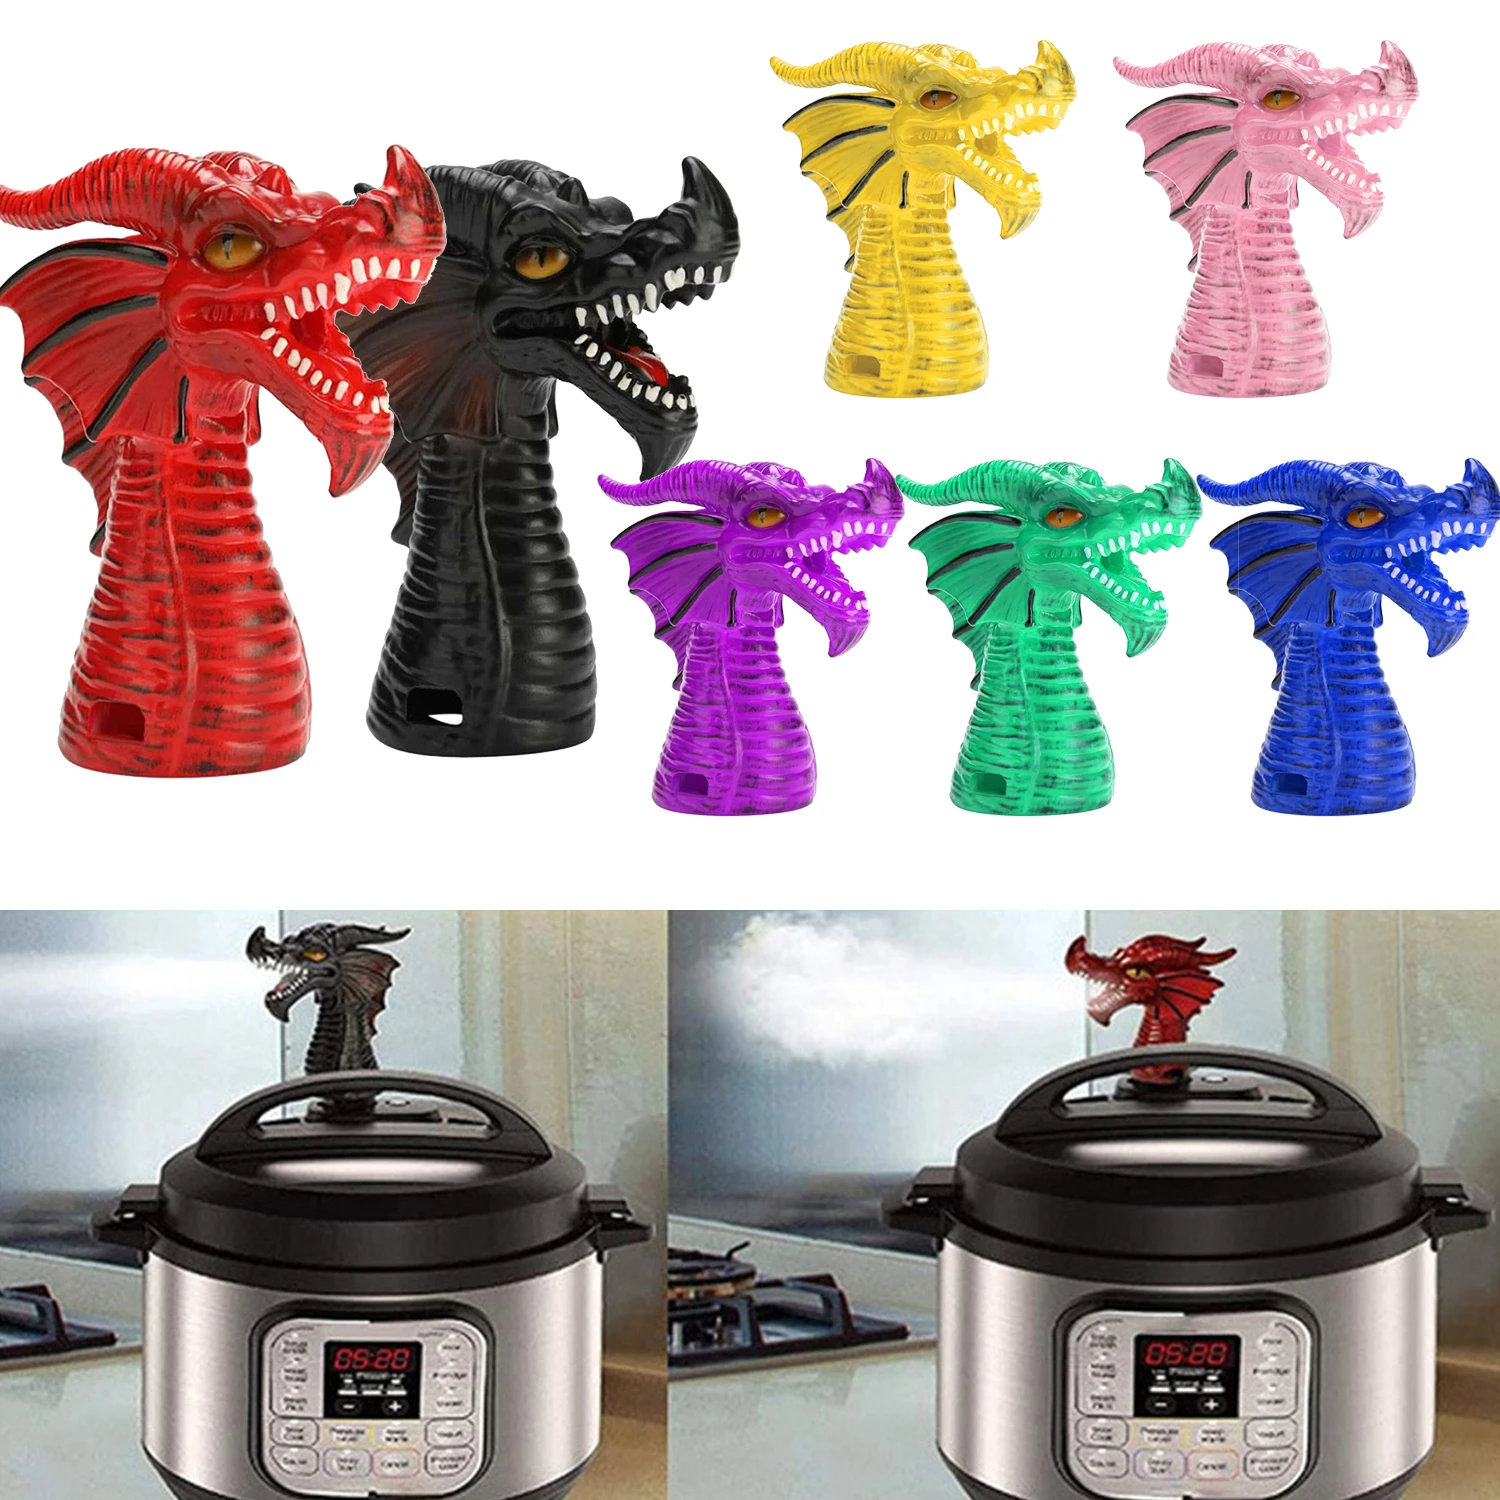 Fire-breathing Dragon Steam Release Diverter Tool Power Pressure Cooker Supplies